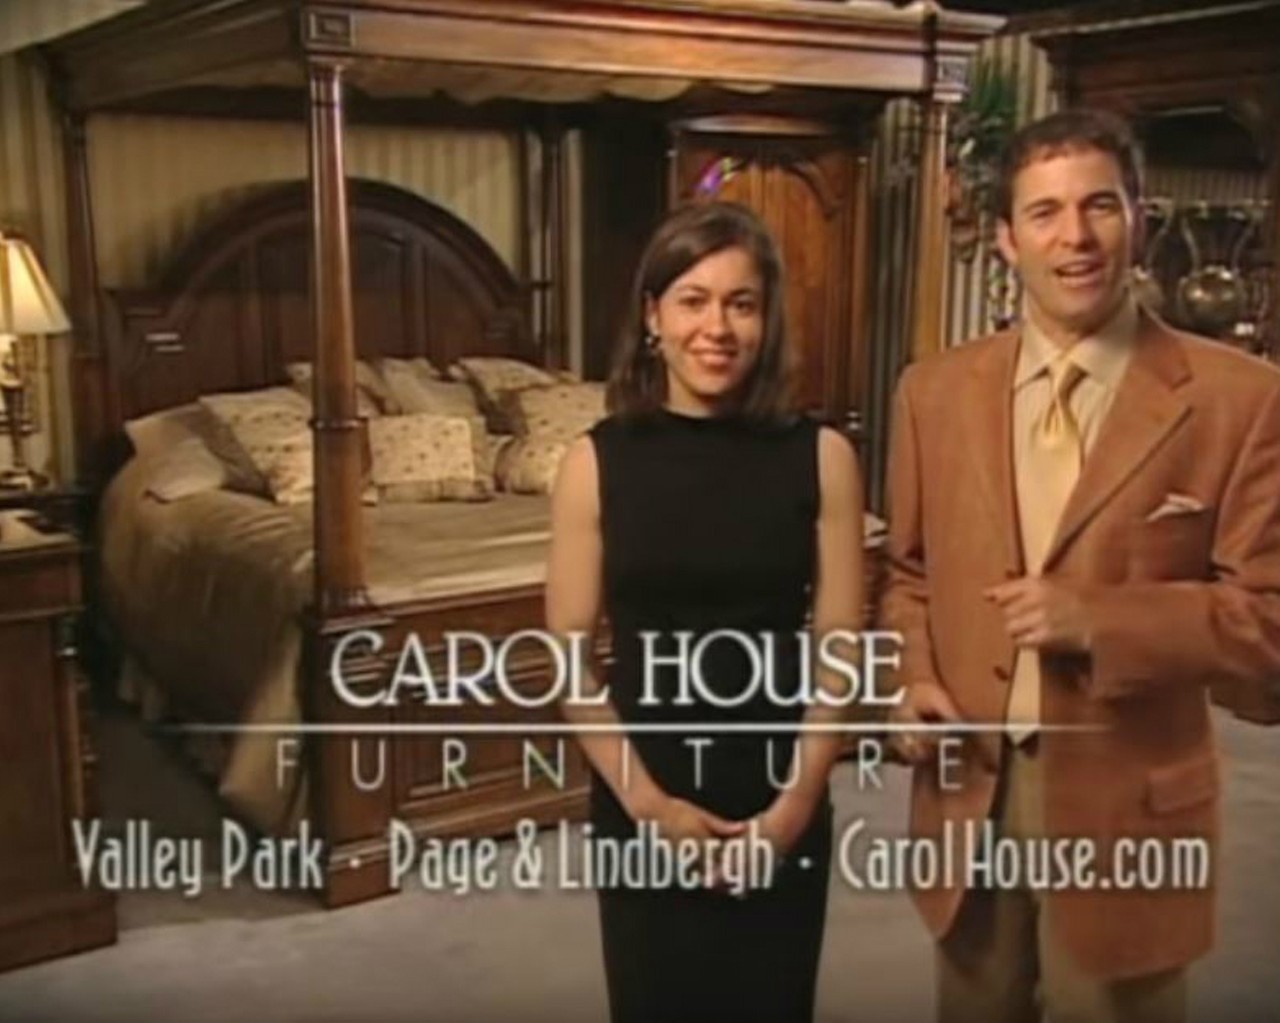 Brook and Amy Dubman of Carol House Furniture
"Because you like nice things."
Photo credit: screengrab from YouTube